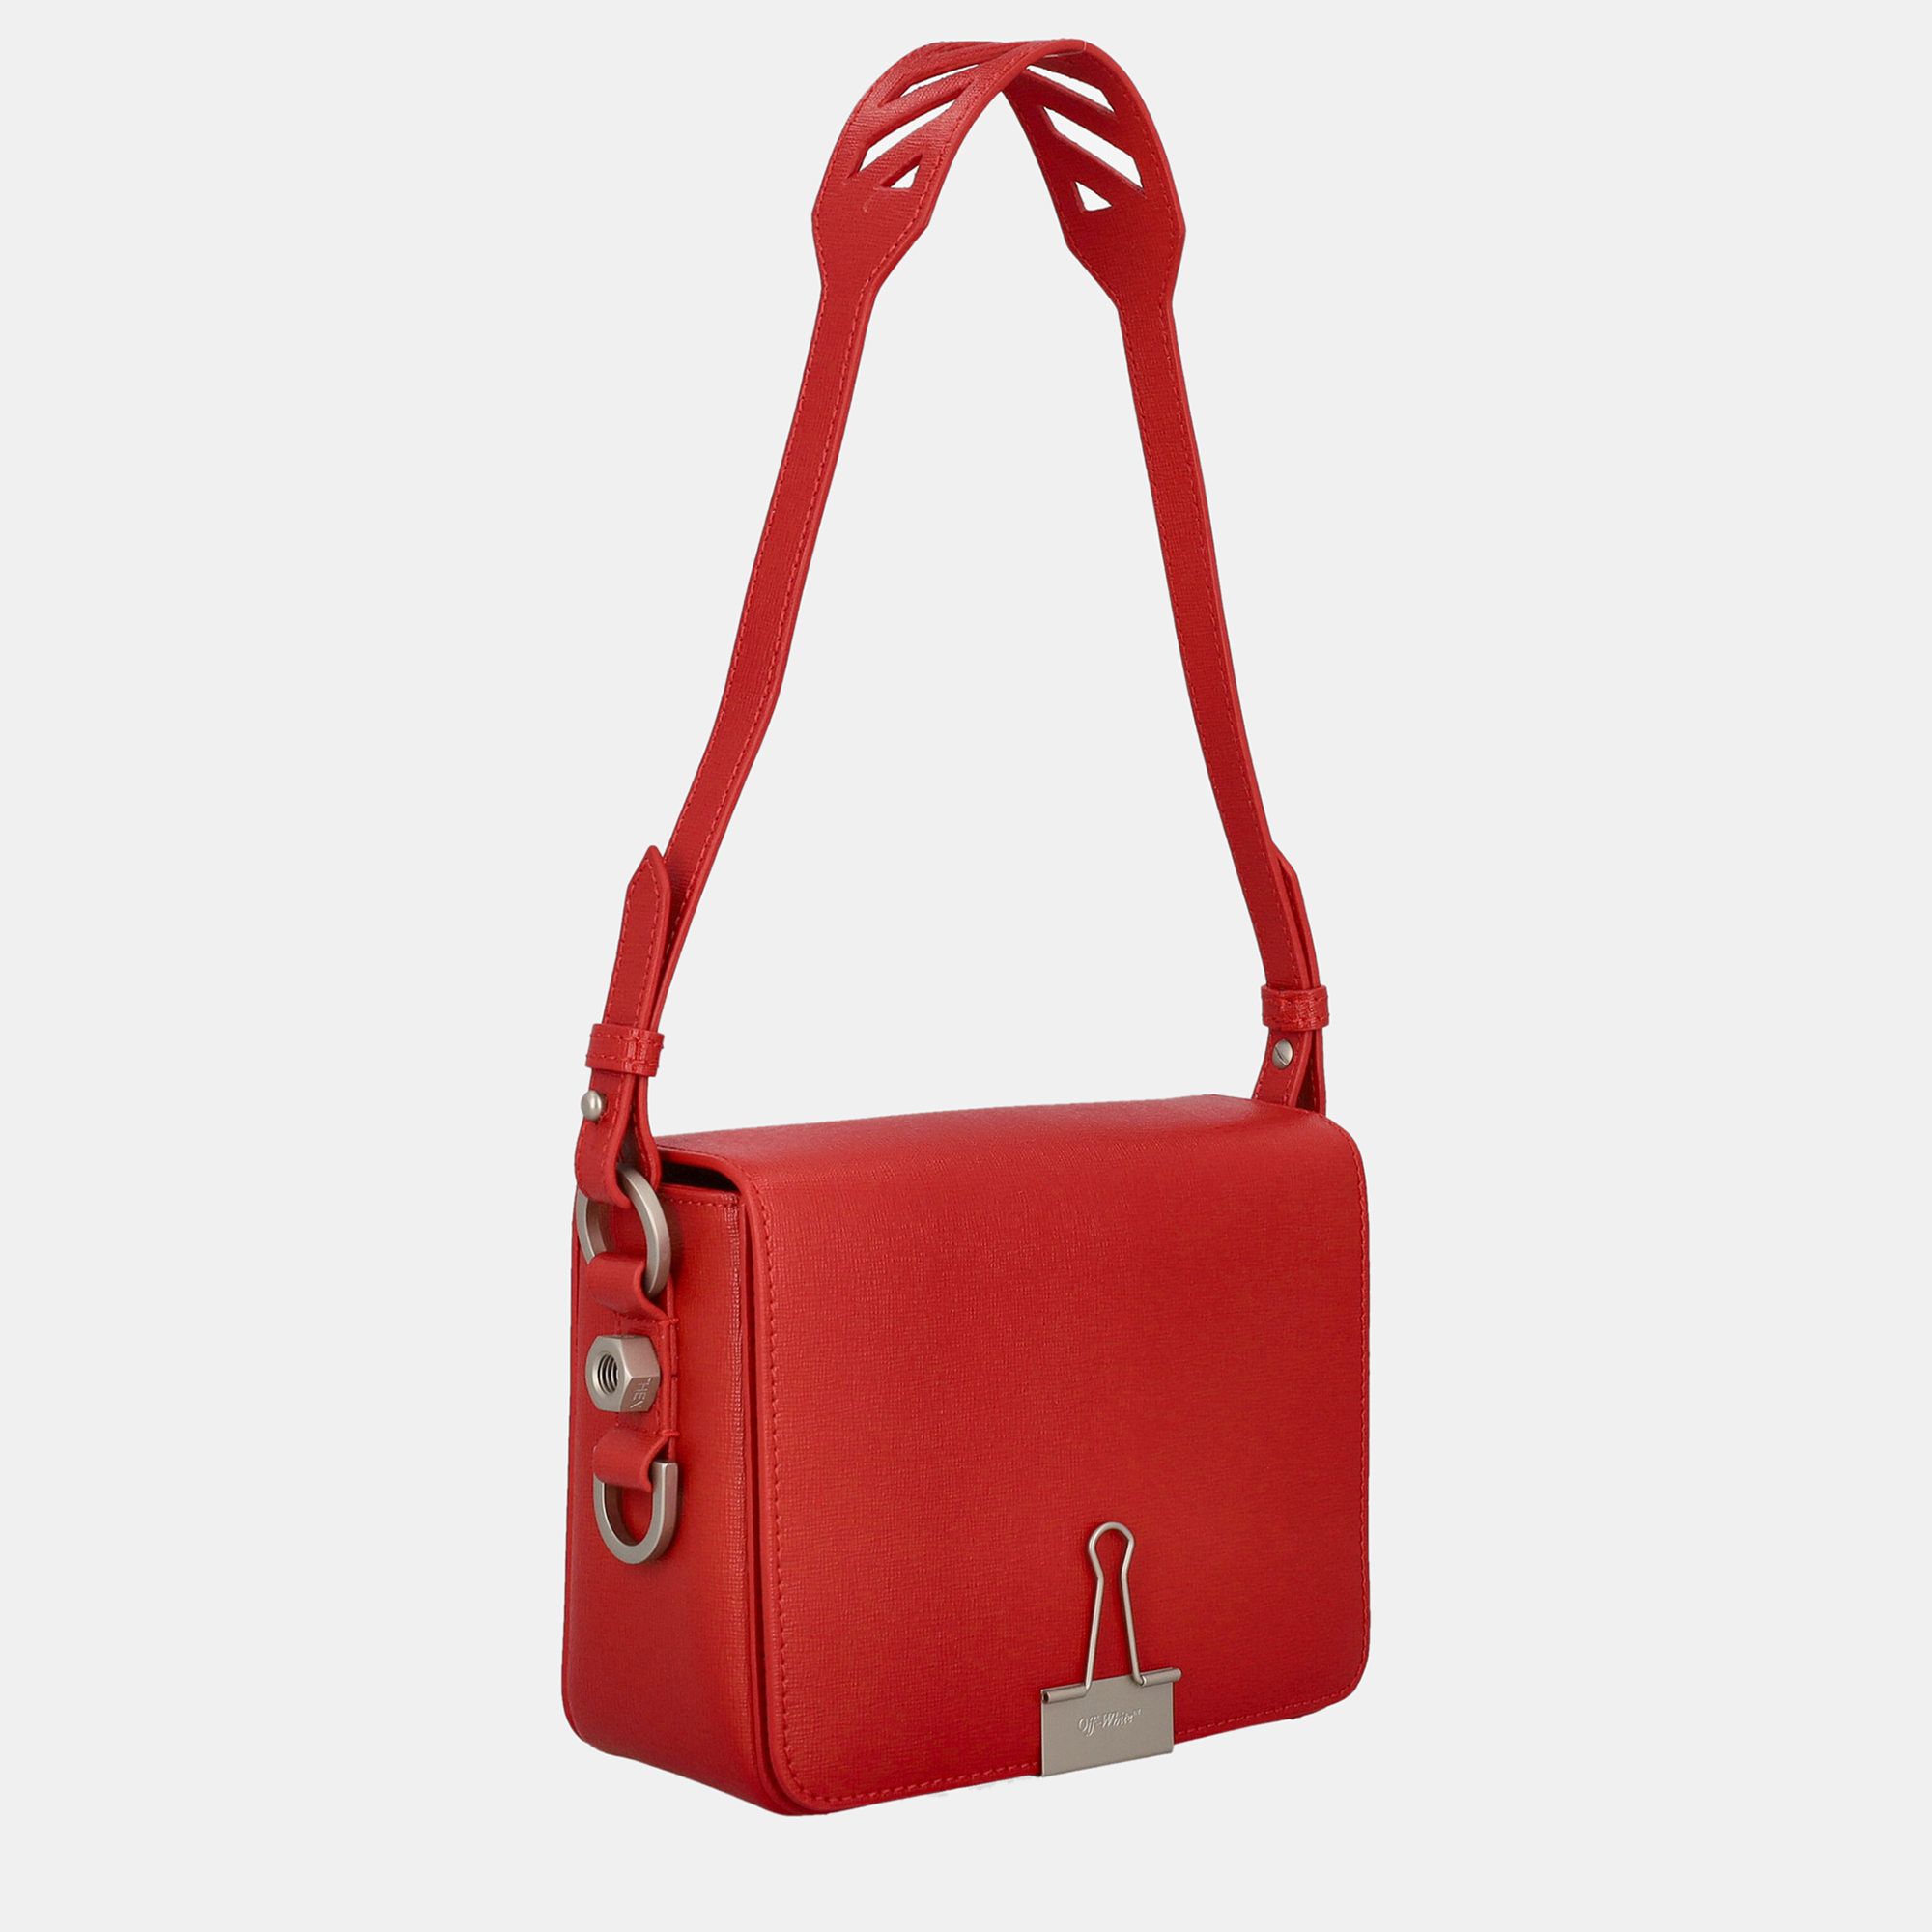 Off-White Women's Leather Cross Body Bag - Red - One Size